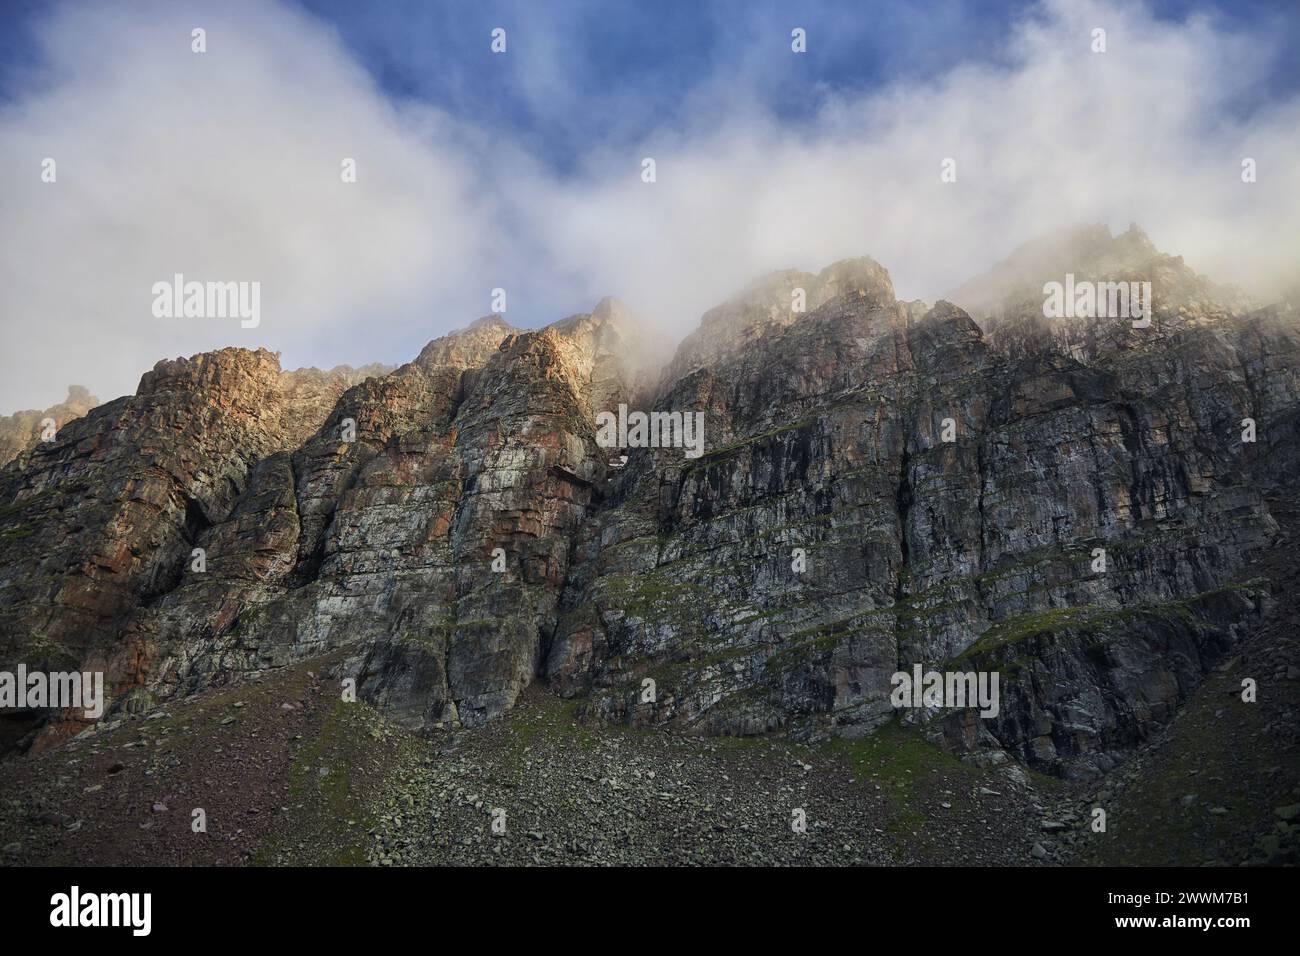 Mist wraps the rugged peaks of a mountain range, with the morning sun illuminating the scene Stock Photo